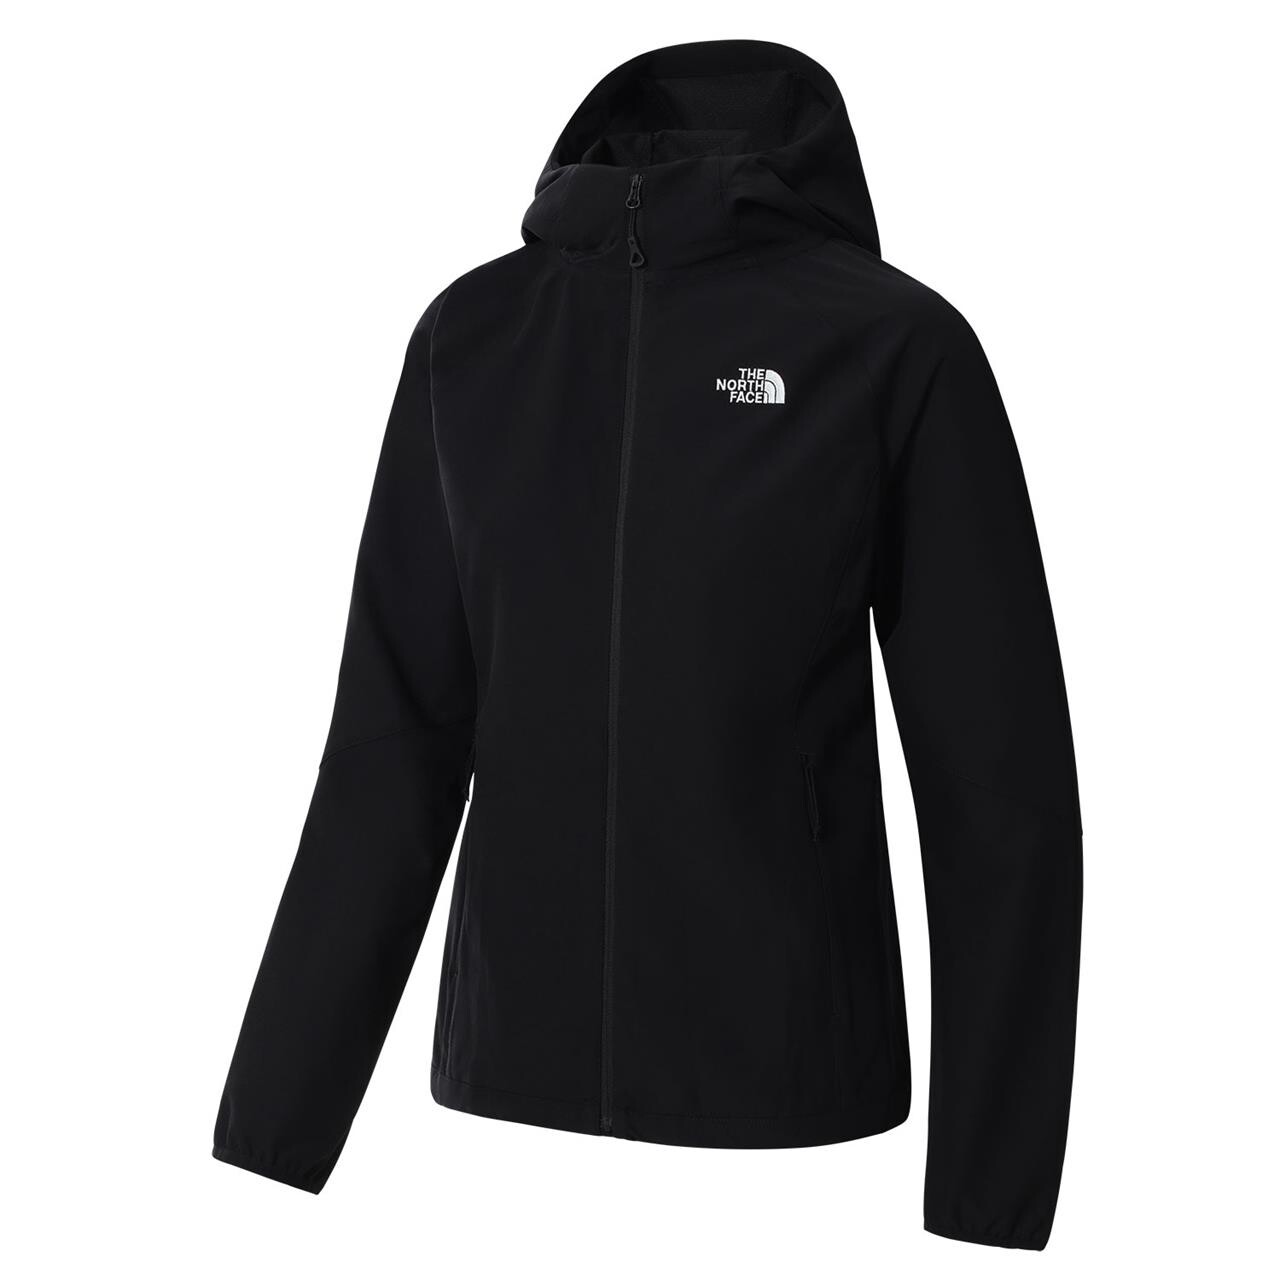 The North Face Womens Nimble Hoodie  (Sort (TNF BLACK) Large)